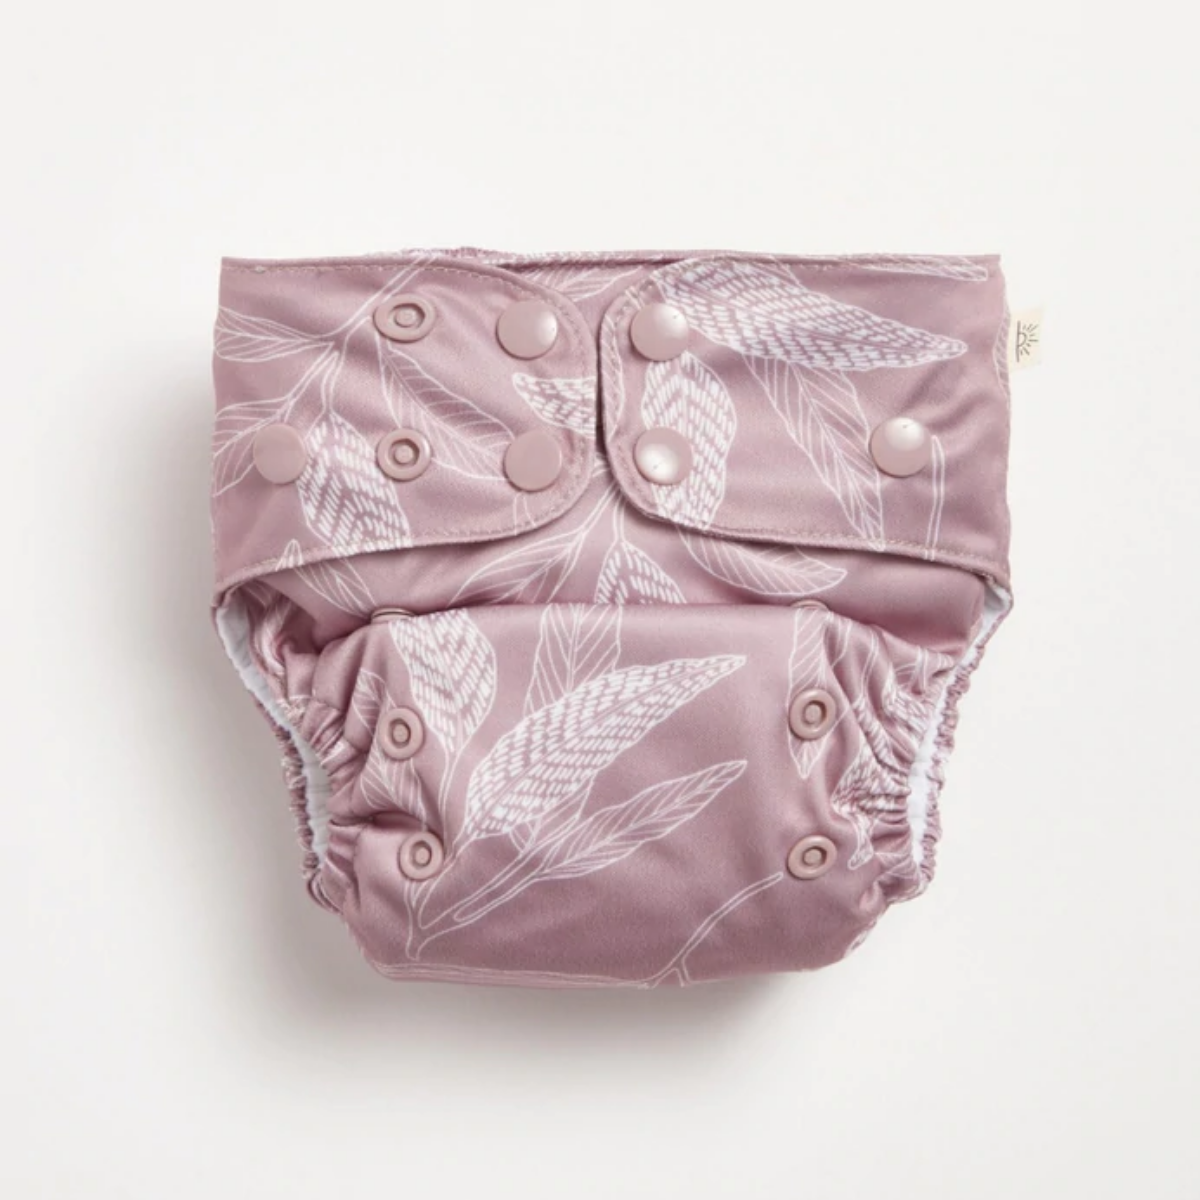 A modern cloth diaper with a native print from EcoNaps in the shade Mauve Native 2.0.